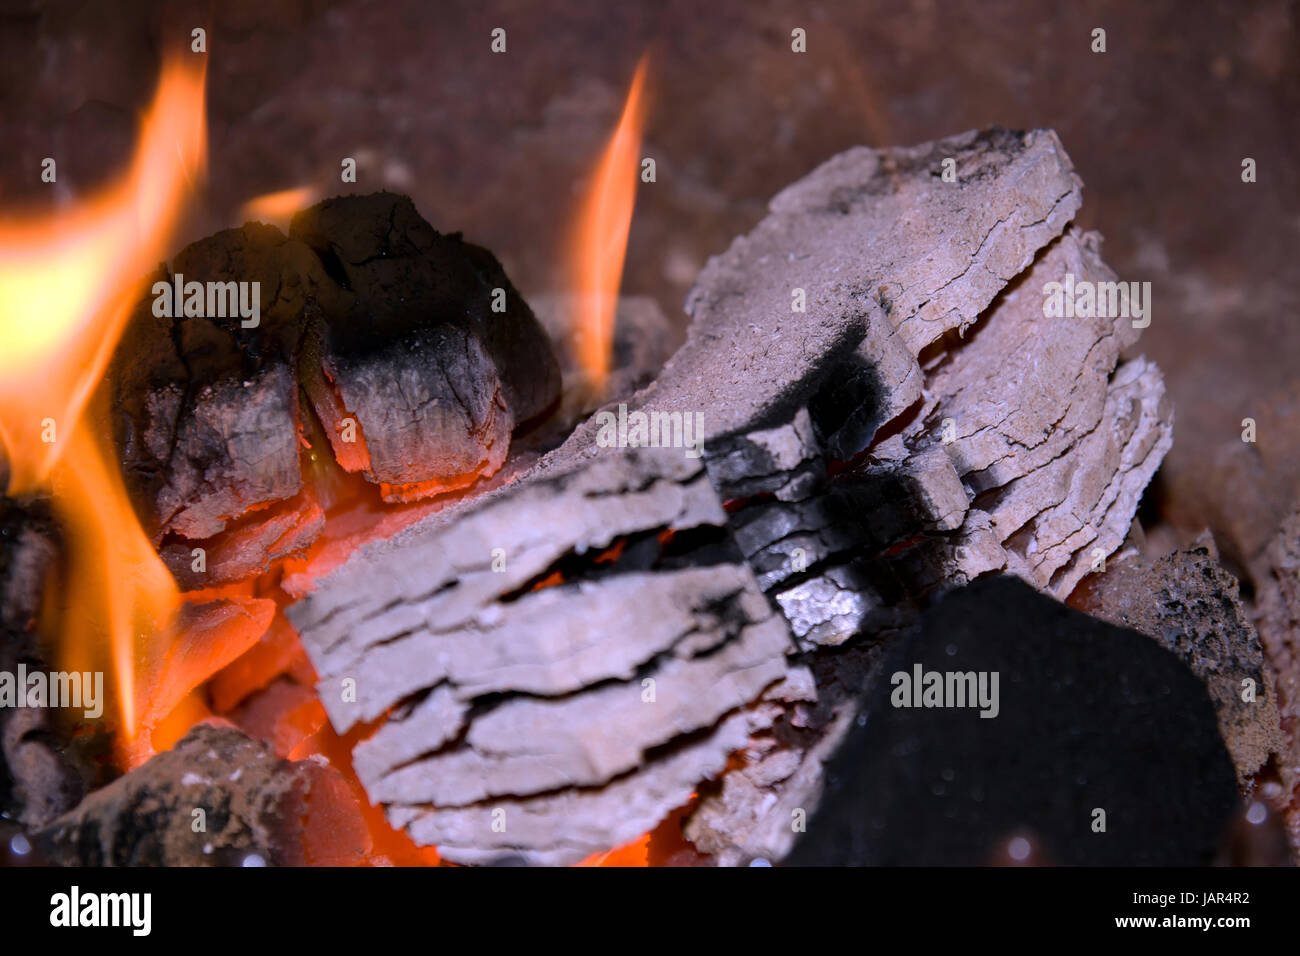 peat briquettes burning in a red and white hot fire Stock Photo